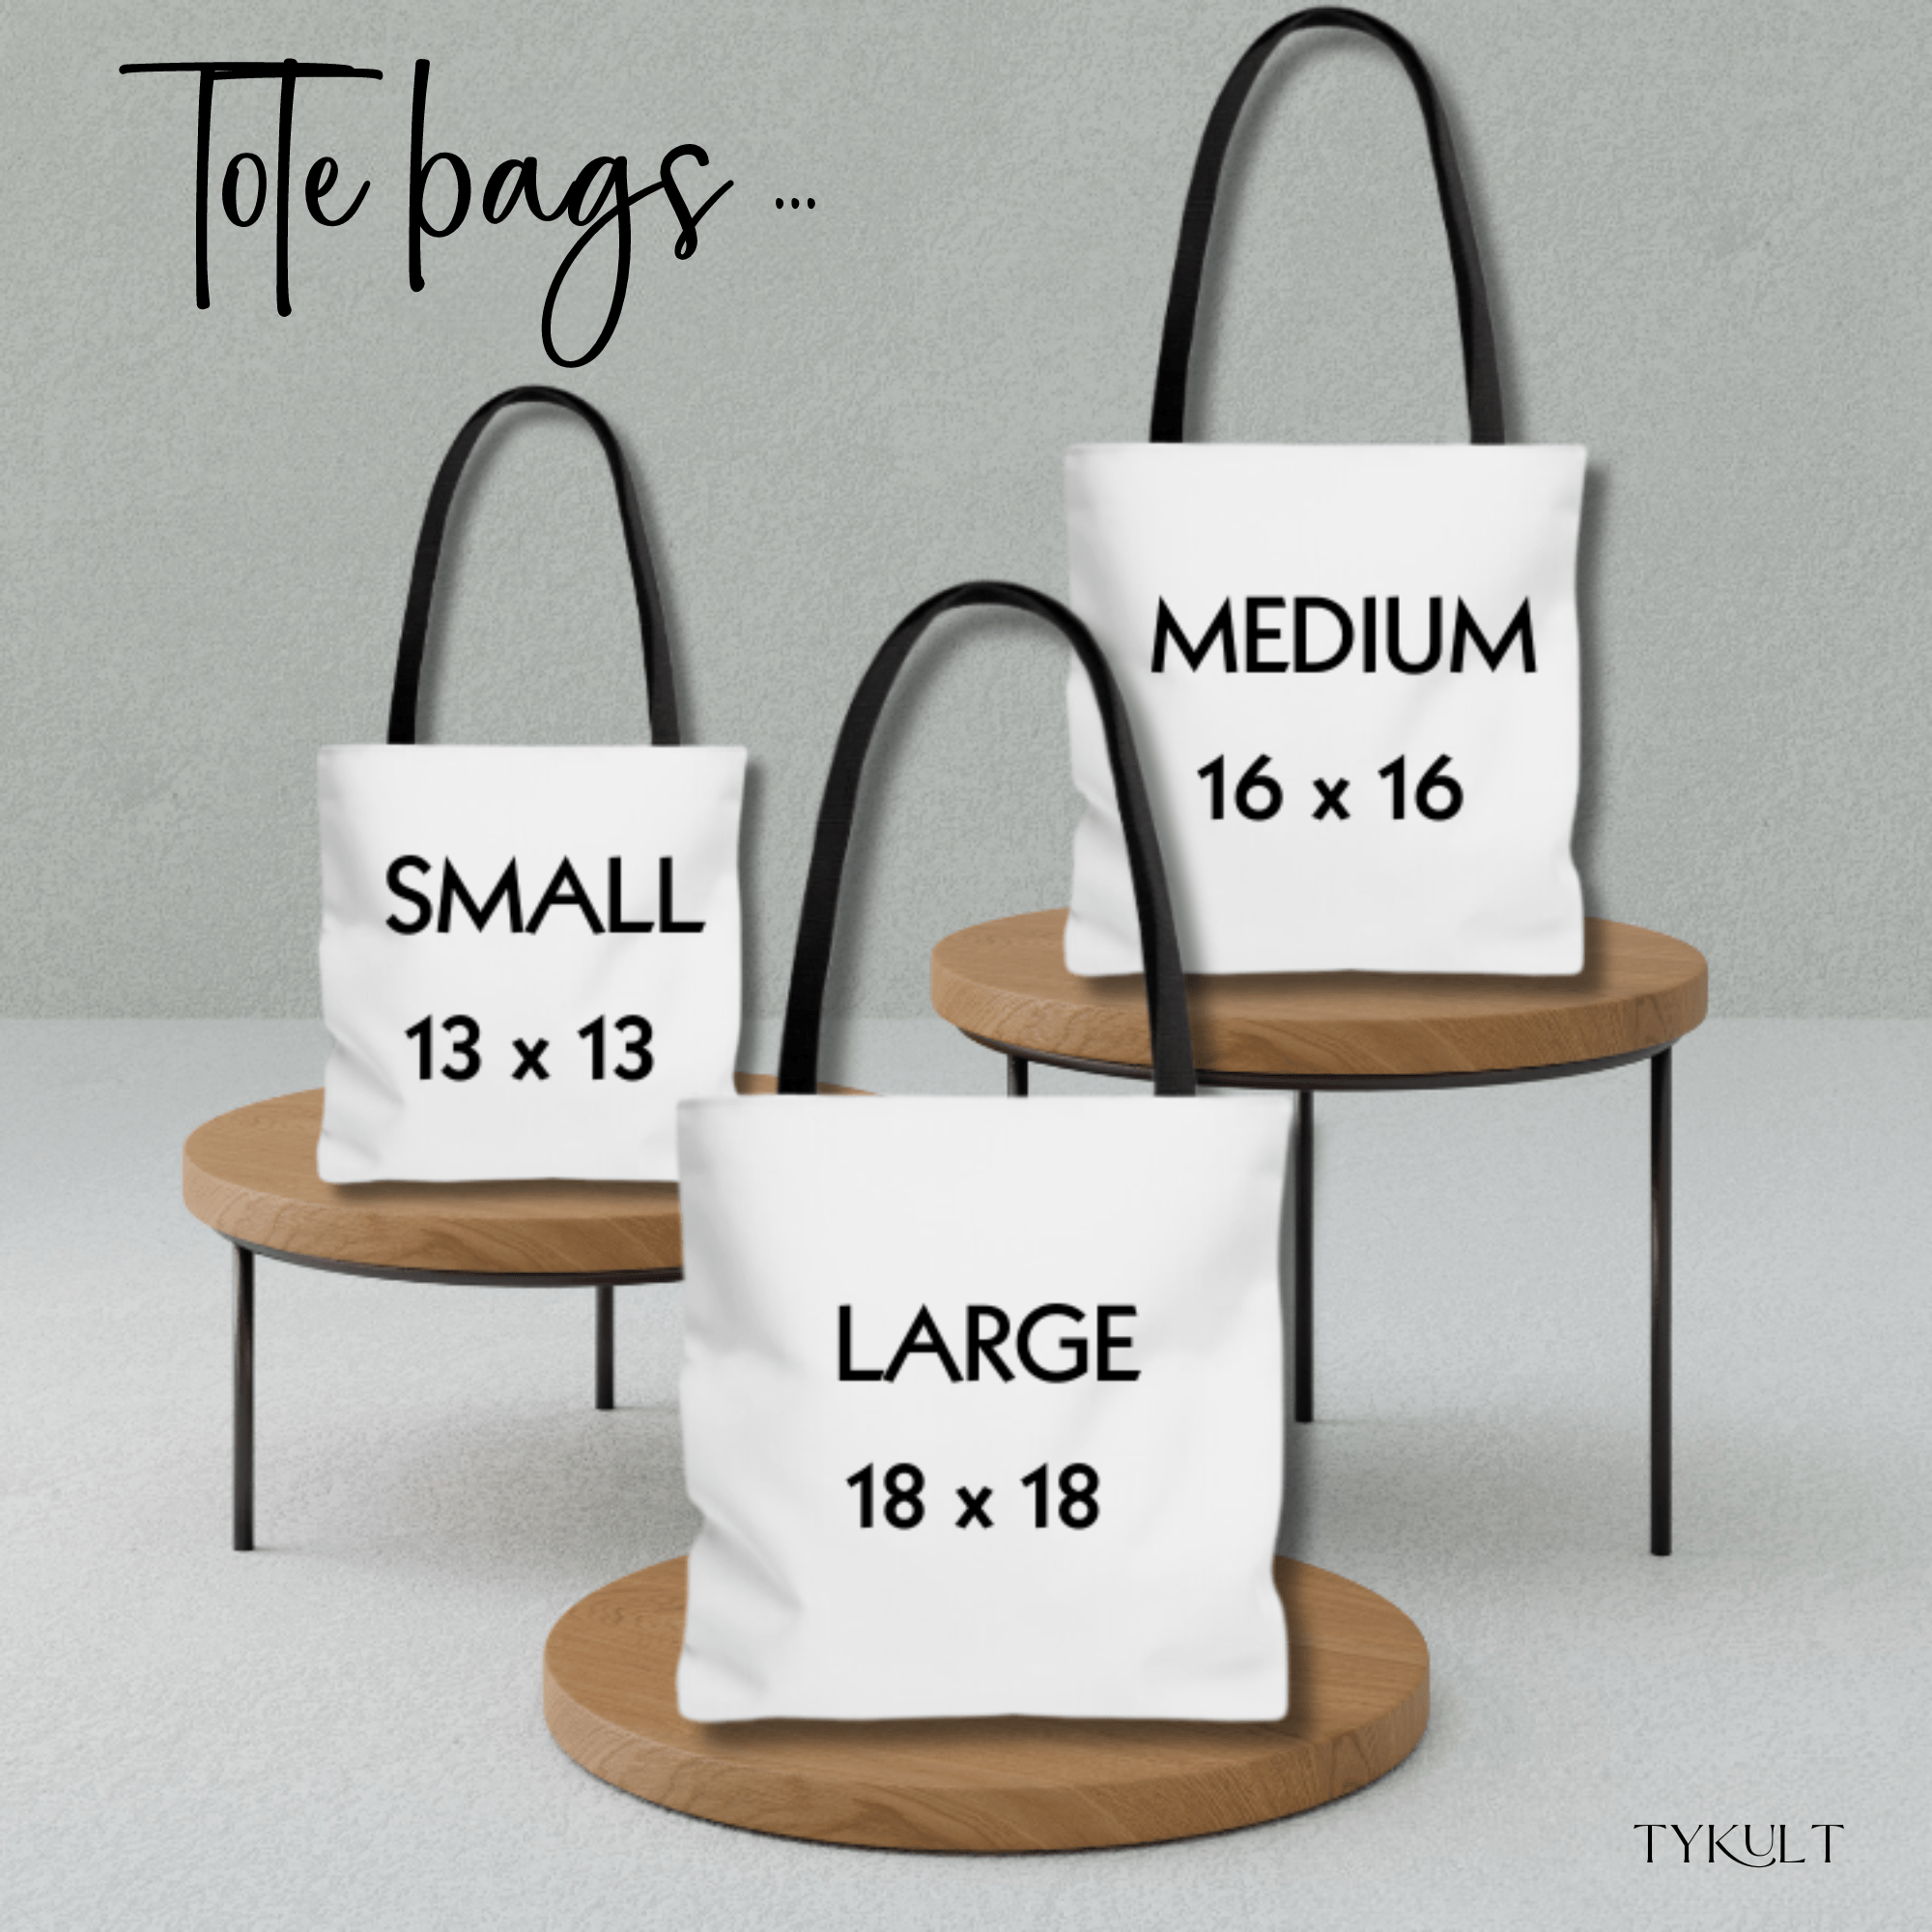 PERSONALIZABLE TOTE BAG | MONOGRAM - X | PERFECT GIFT for TEACHER, SISTER, MOM